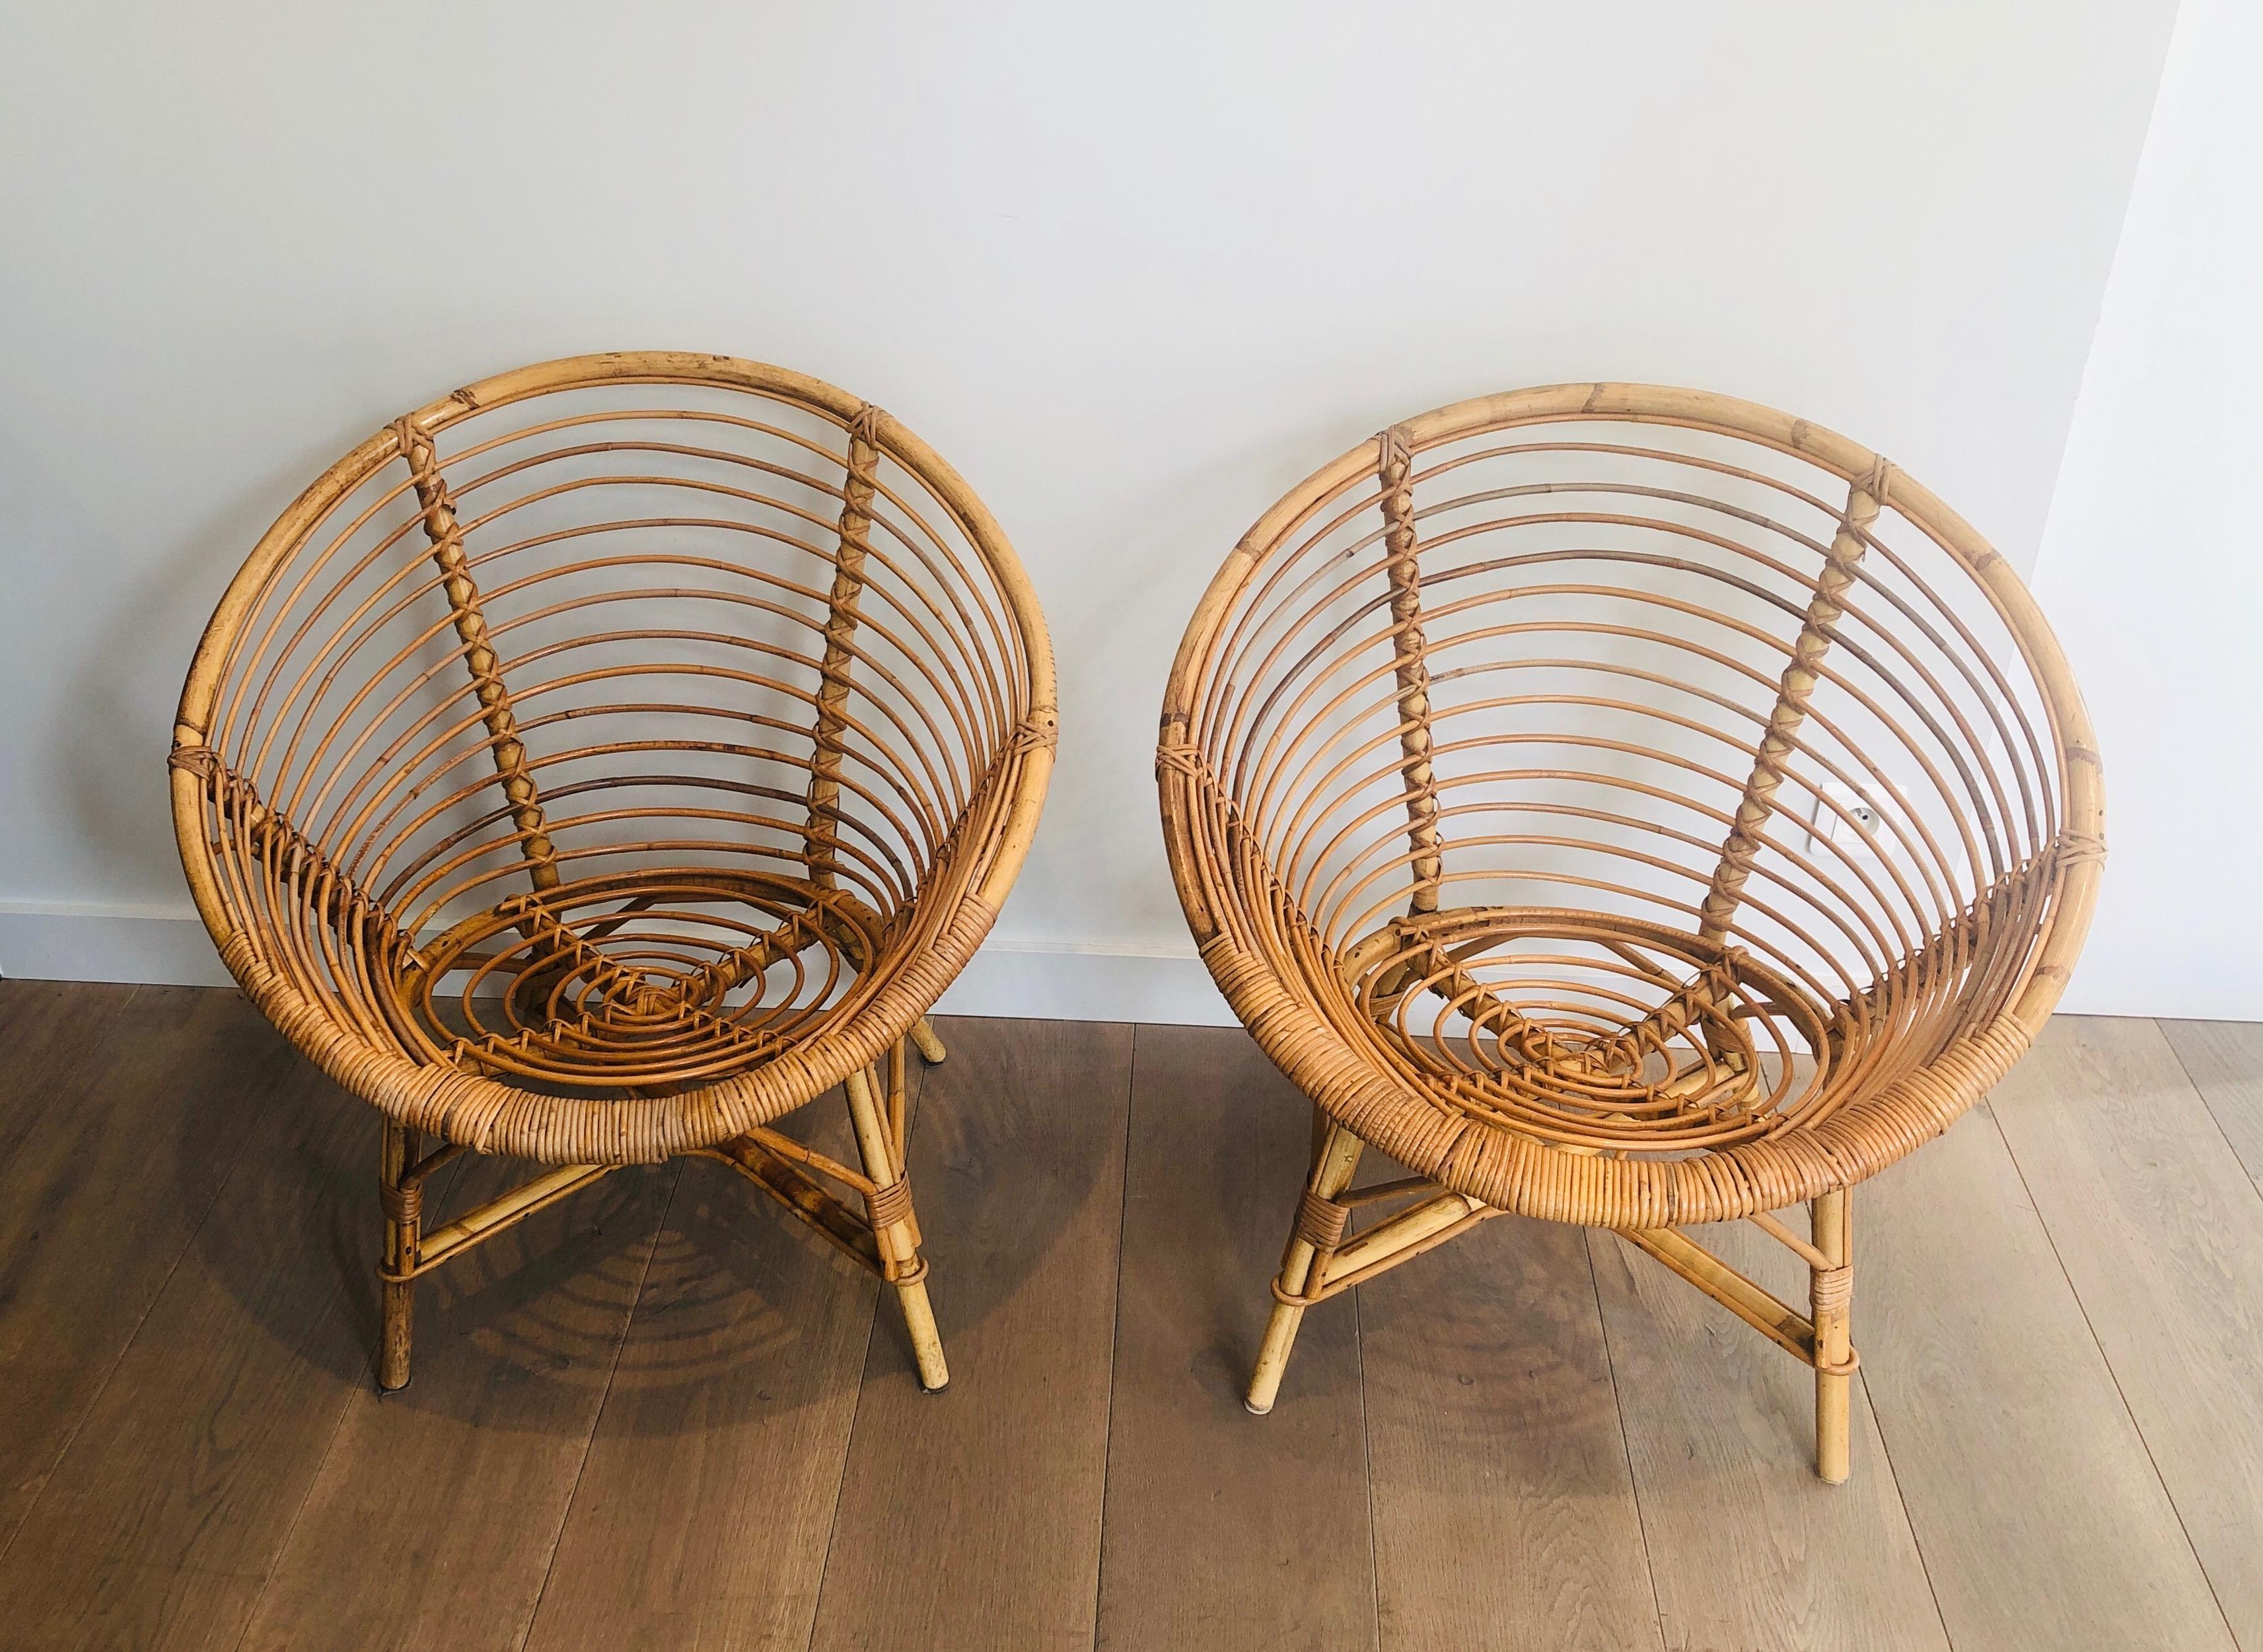 This very nice pair of armchairs is made of rattan. This round shape is unusual and make these armchairs very special and decorative. This is a French work. Circa 1970